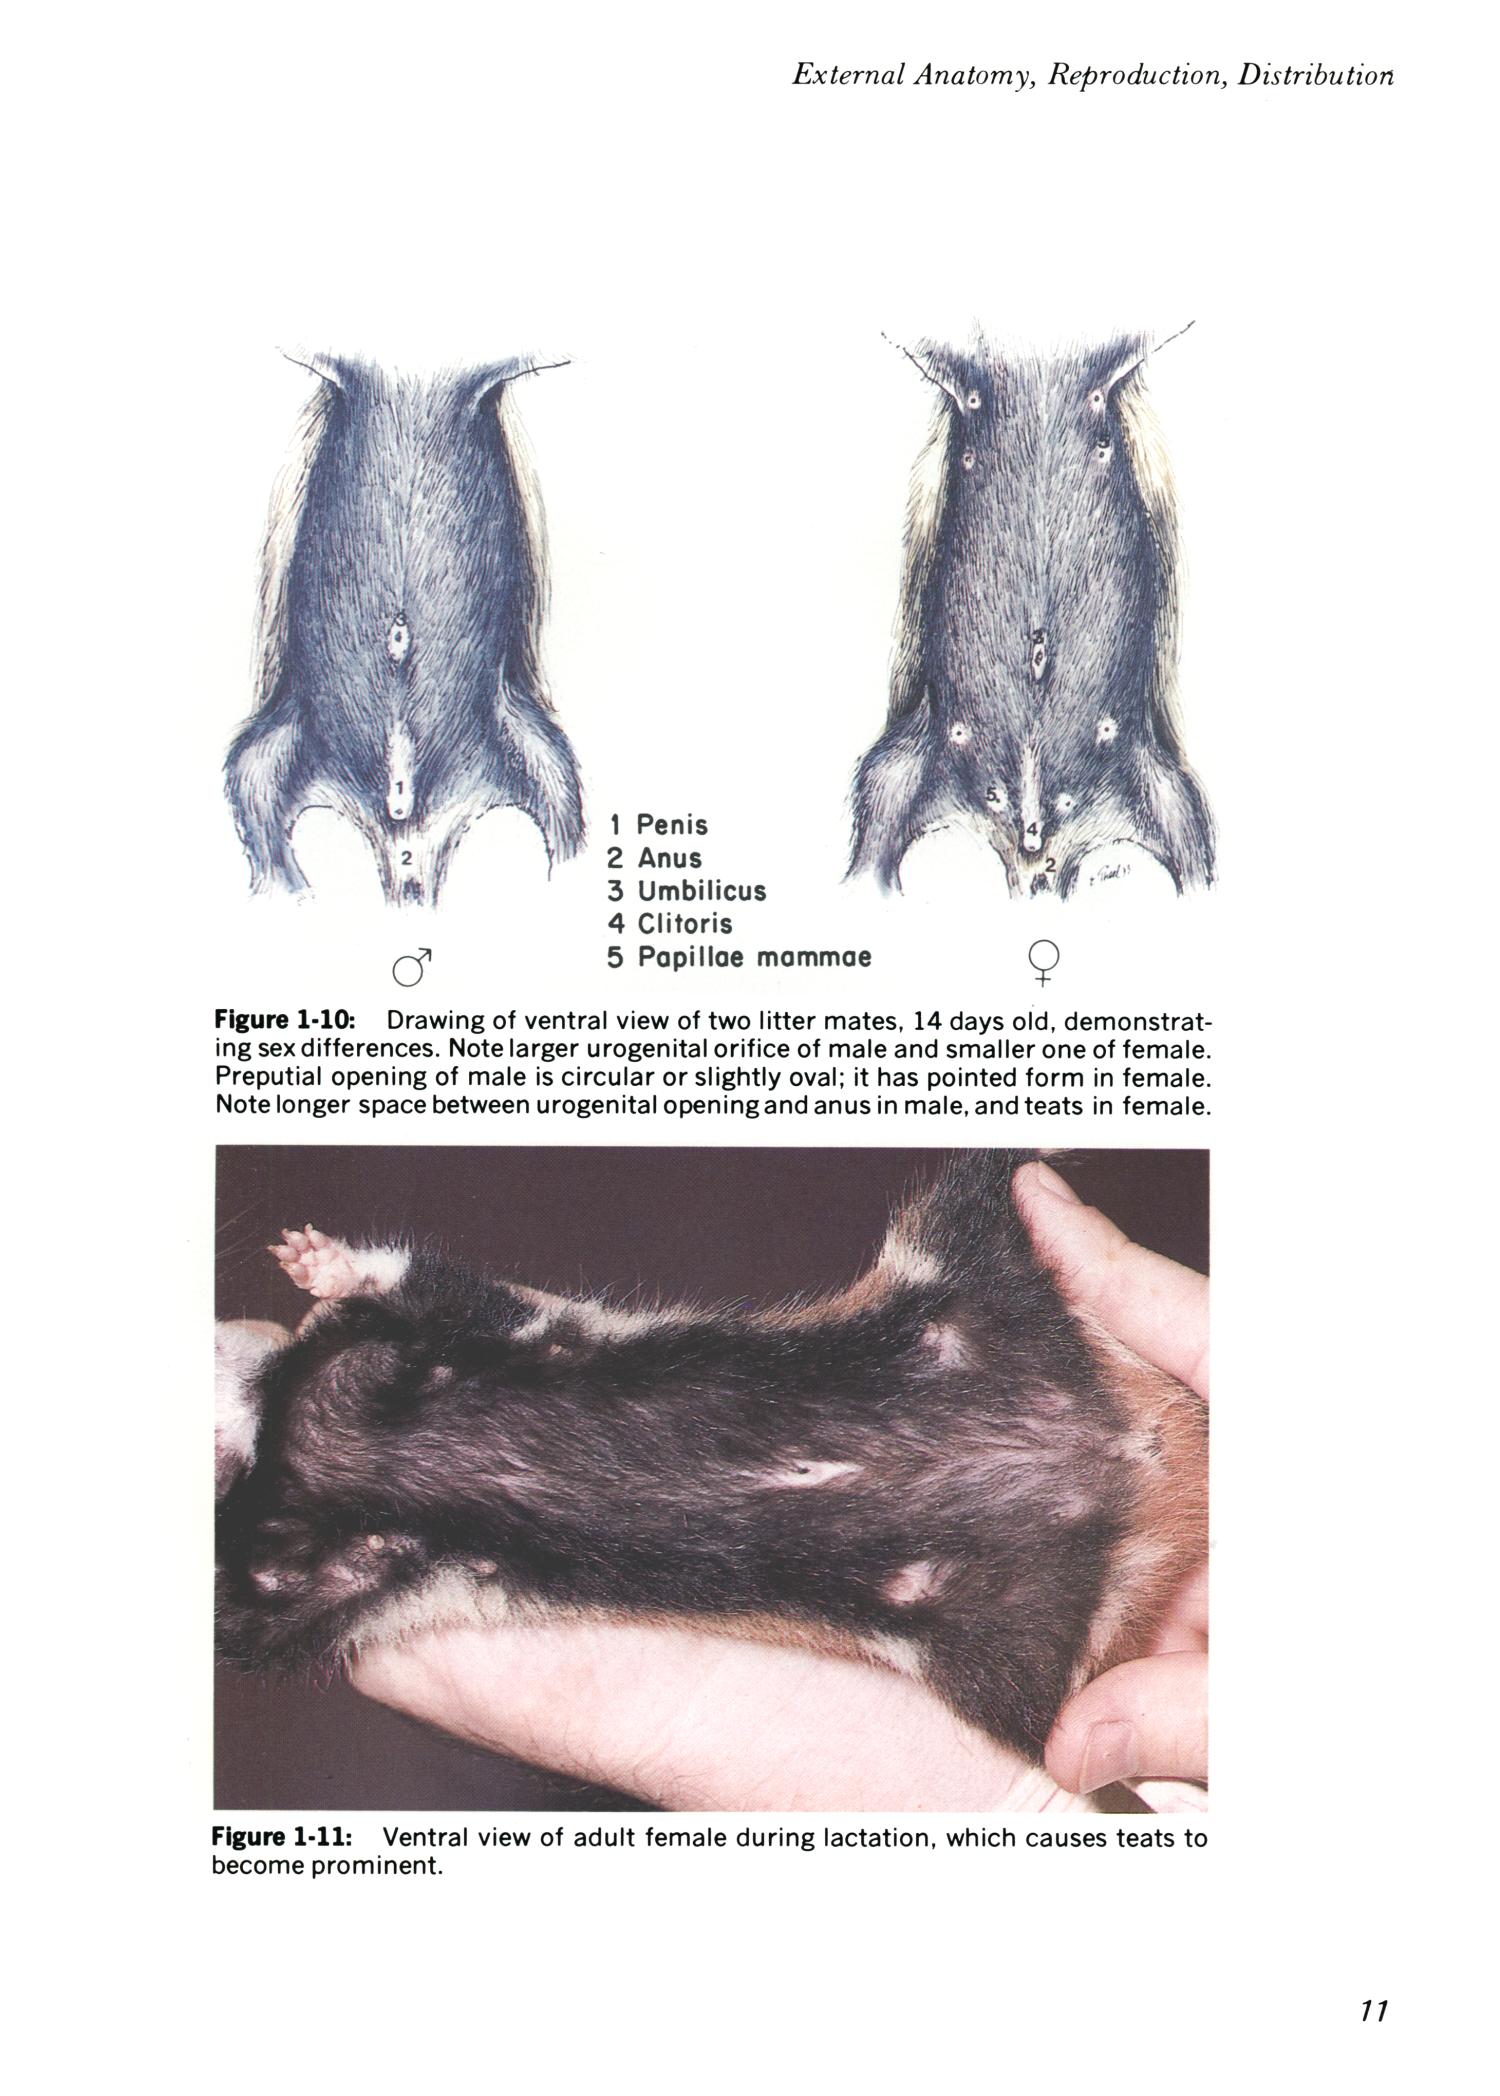 Clinical anatomy of the European hamster, Cricetus cricetus, L. - Page